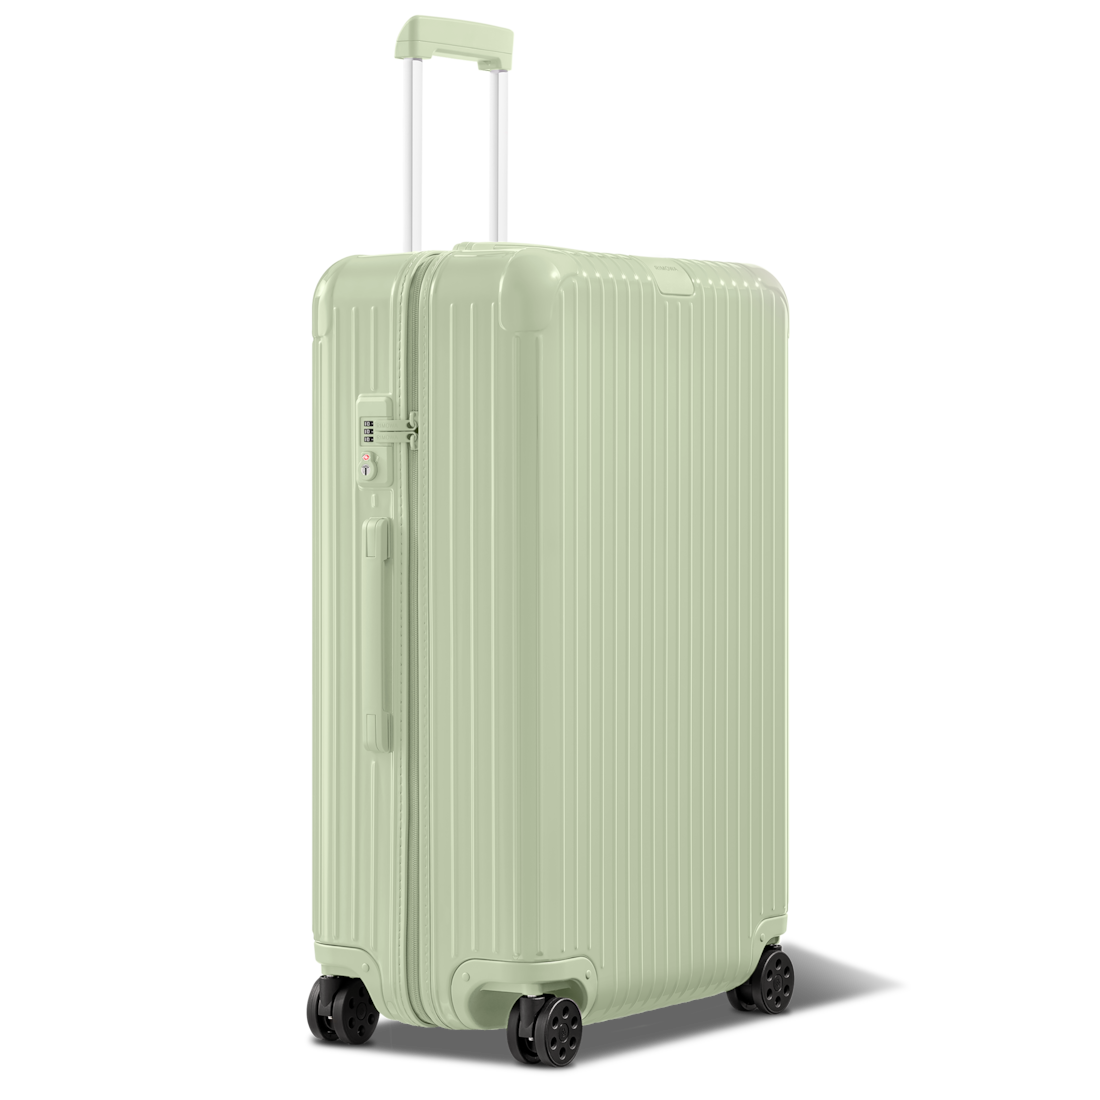 Essential Check-In L Lightweight Suitcase | Mint green | RIMOWA